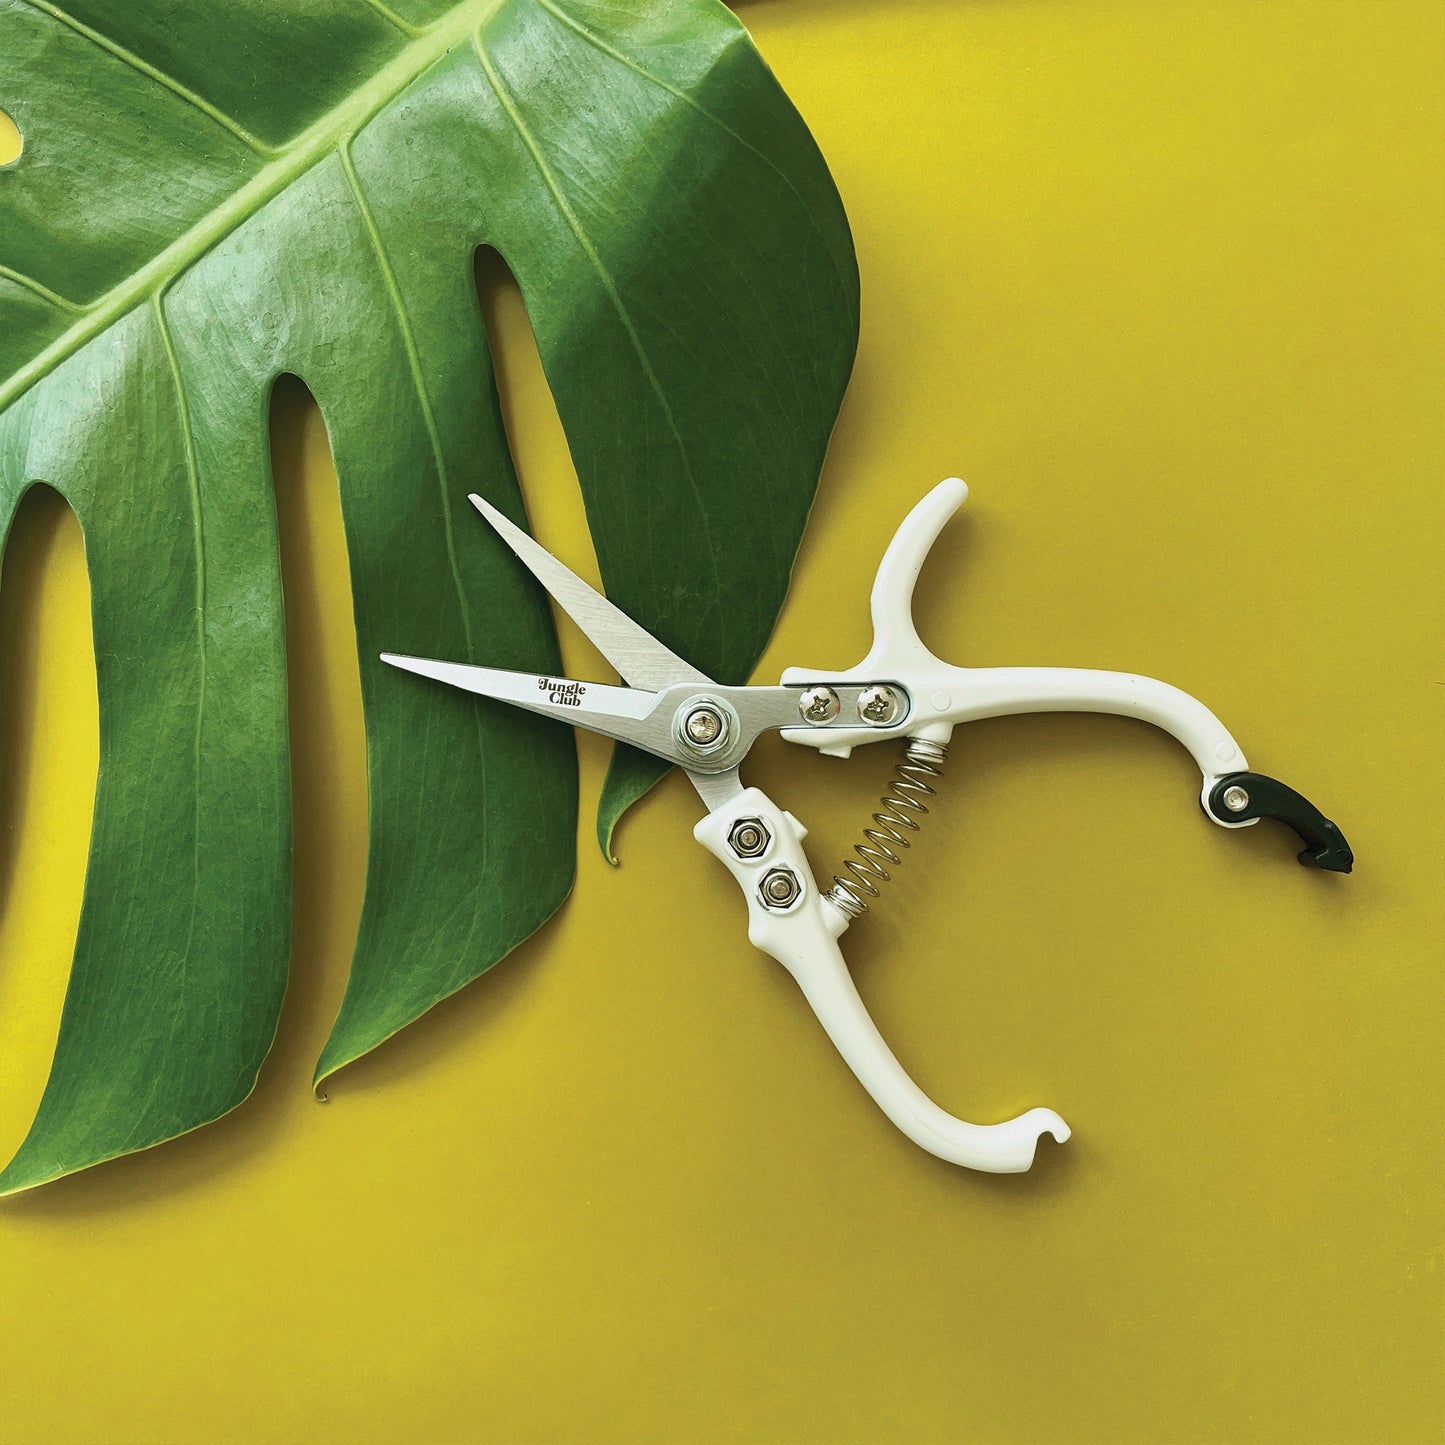 On a green background is a pair of pruning shears with white handles and pointed metal shears along with tiny black text that reads, "Jungle Club". 